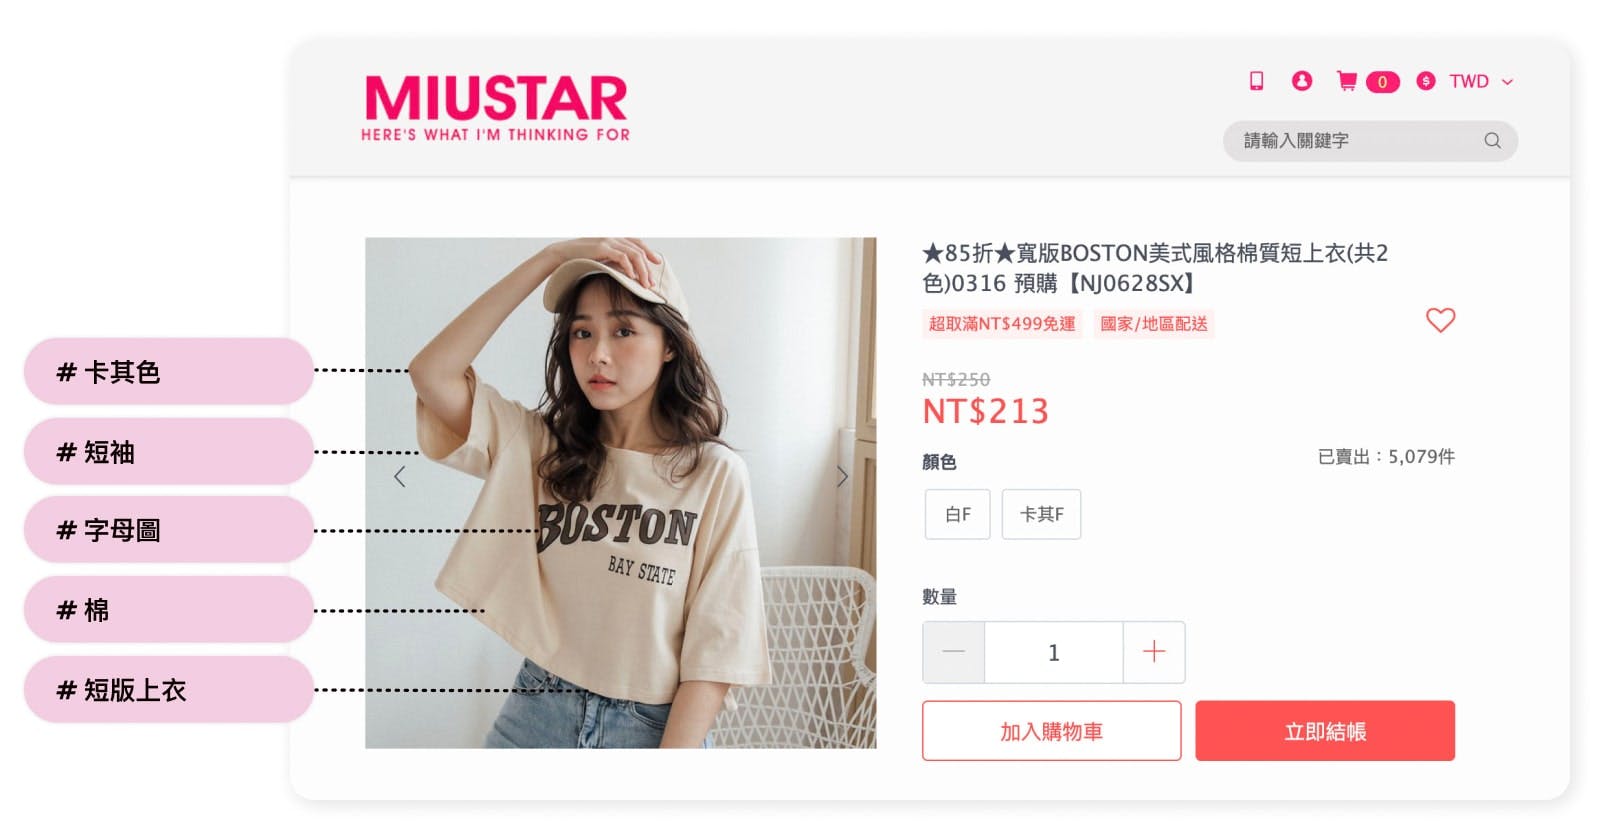 Miustar uses Rosetta AI's personalized recommendation to understand customer's preferences